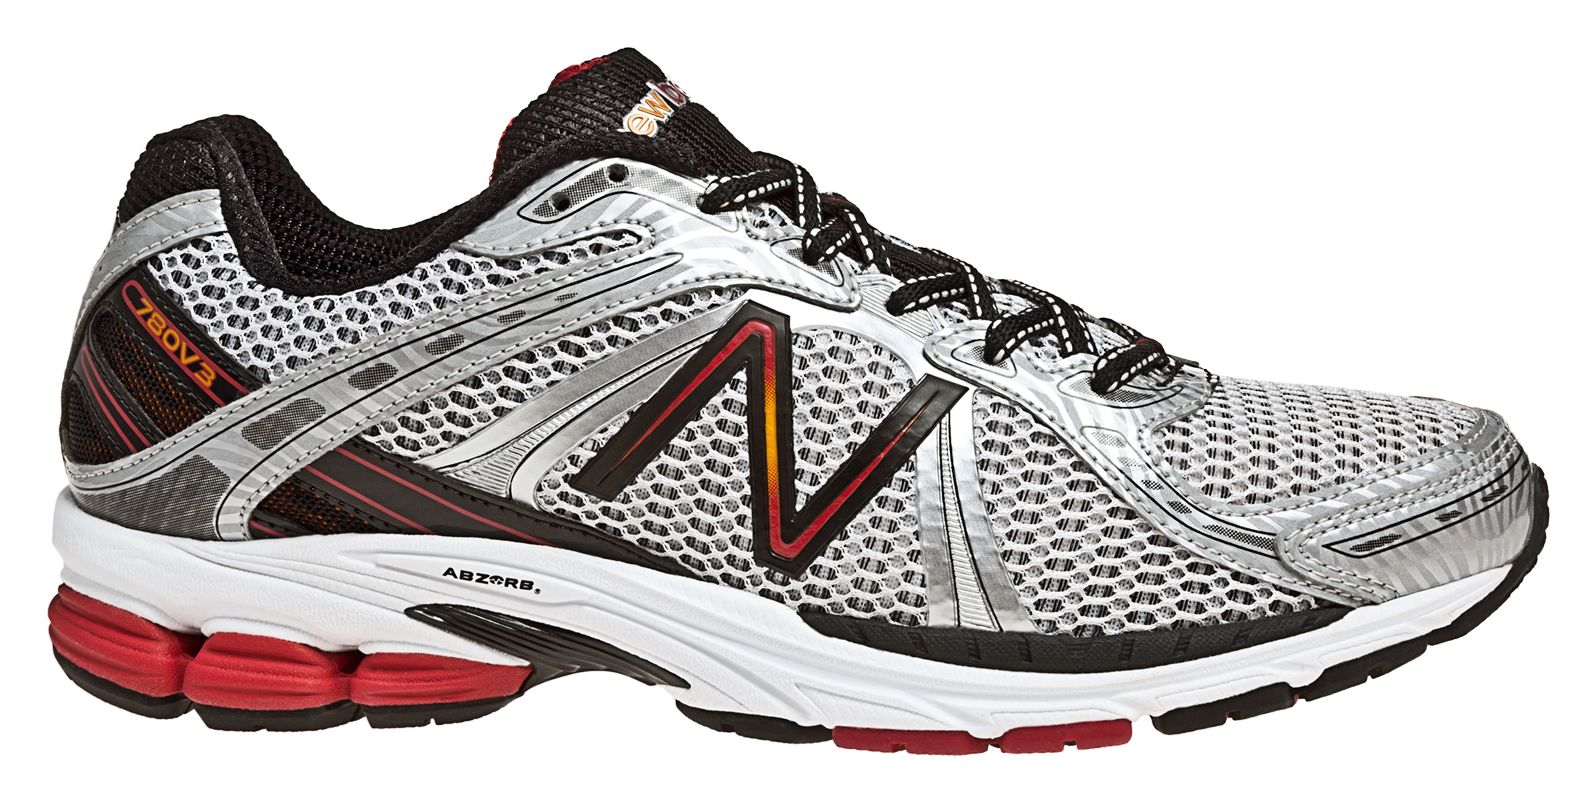 New Balance M780-V3 on Sale - Discounts Up to 20% Off on M780WR3 at Joe's New  Balance Outlet